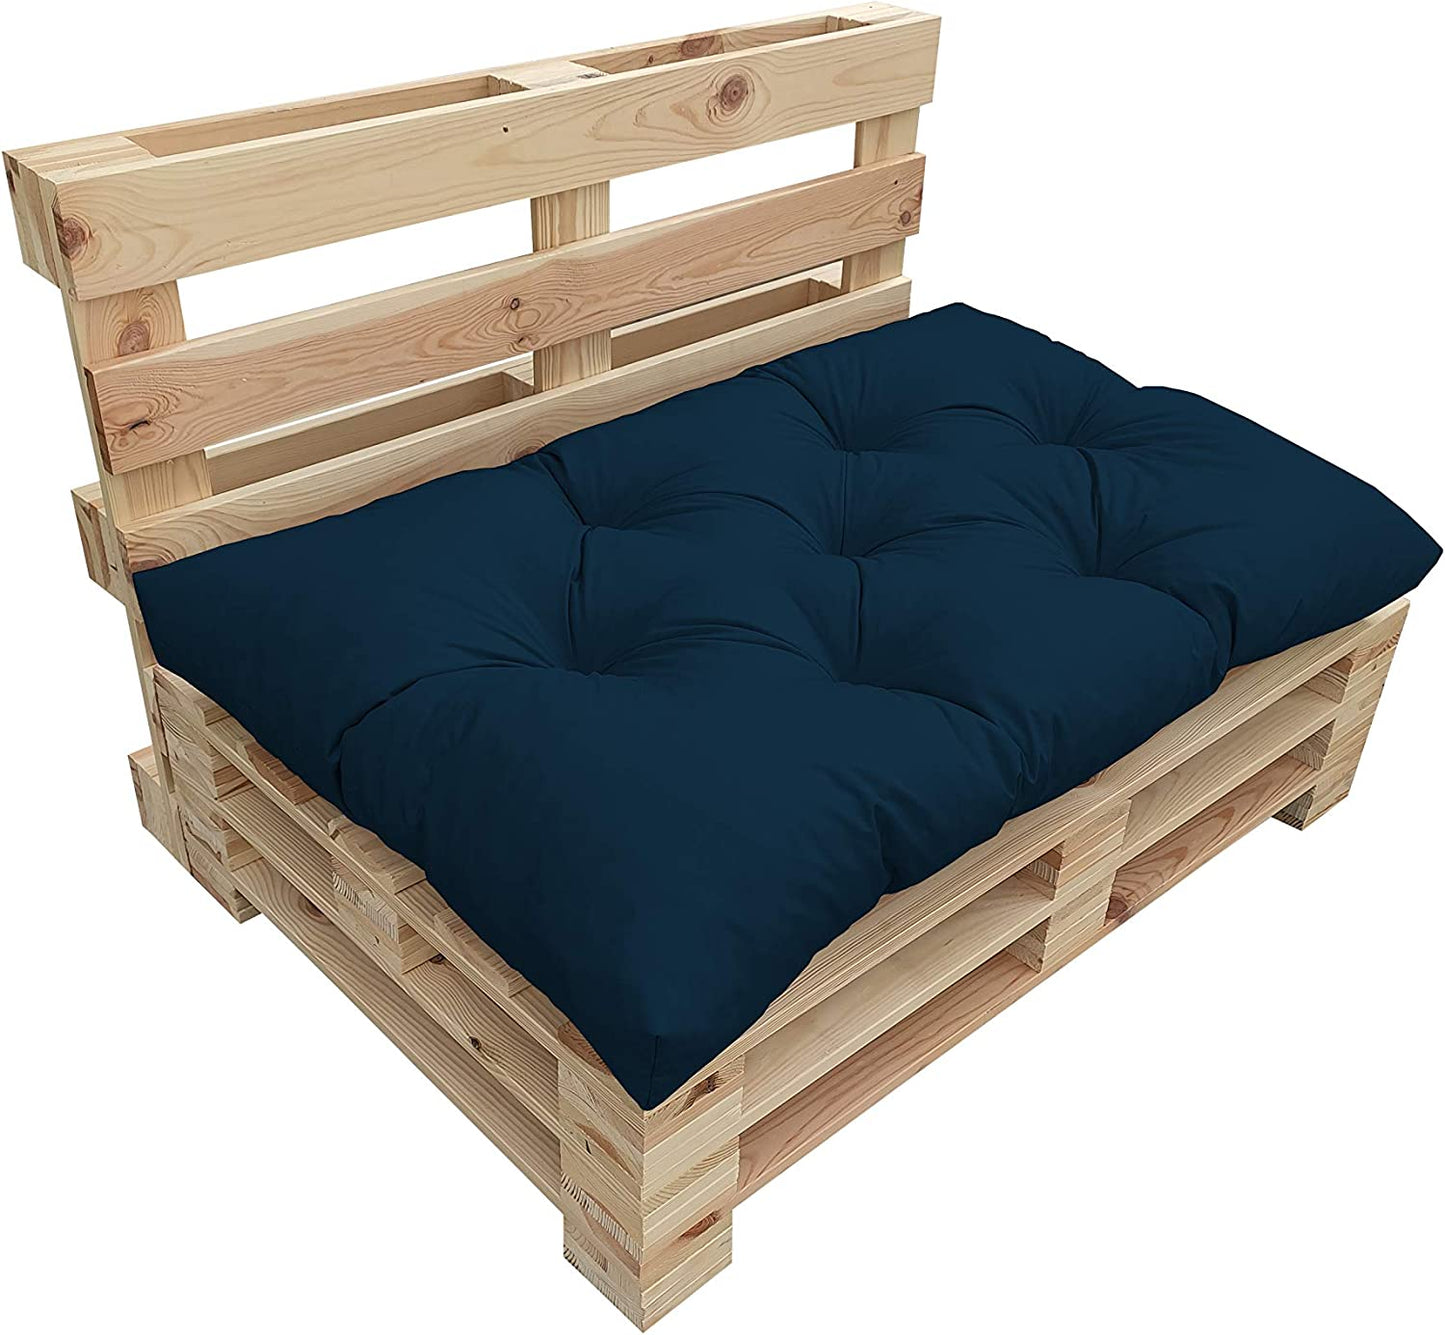 Pallet cushions pallet pads for pallet furniture waterproof